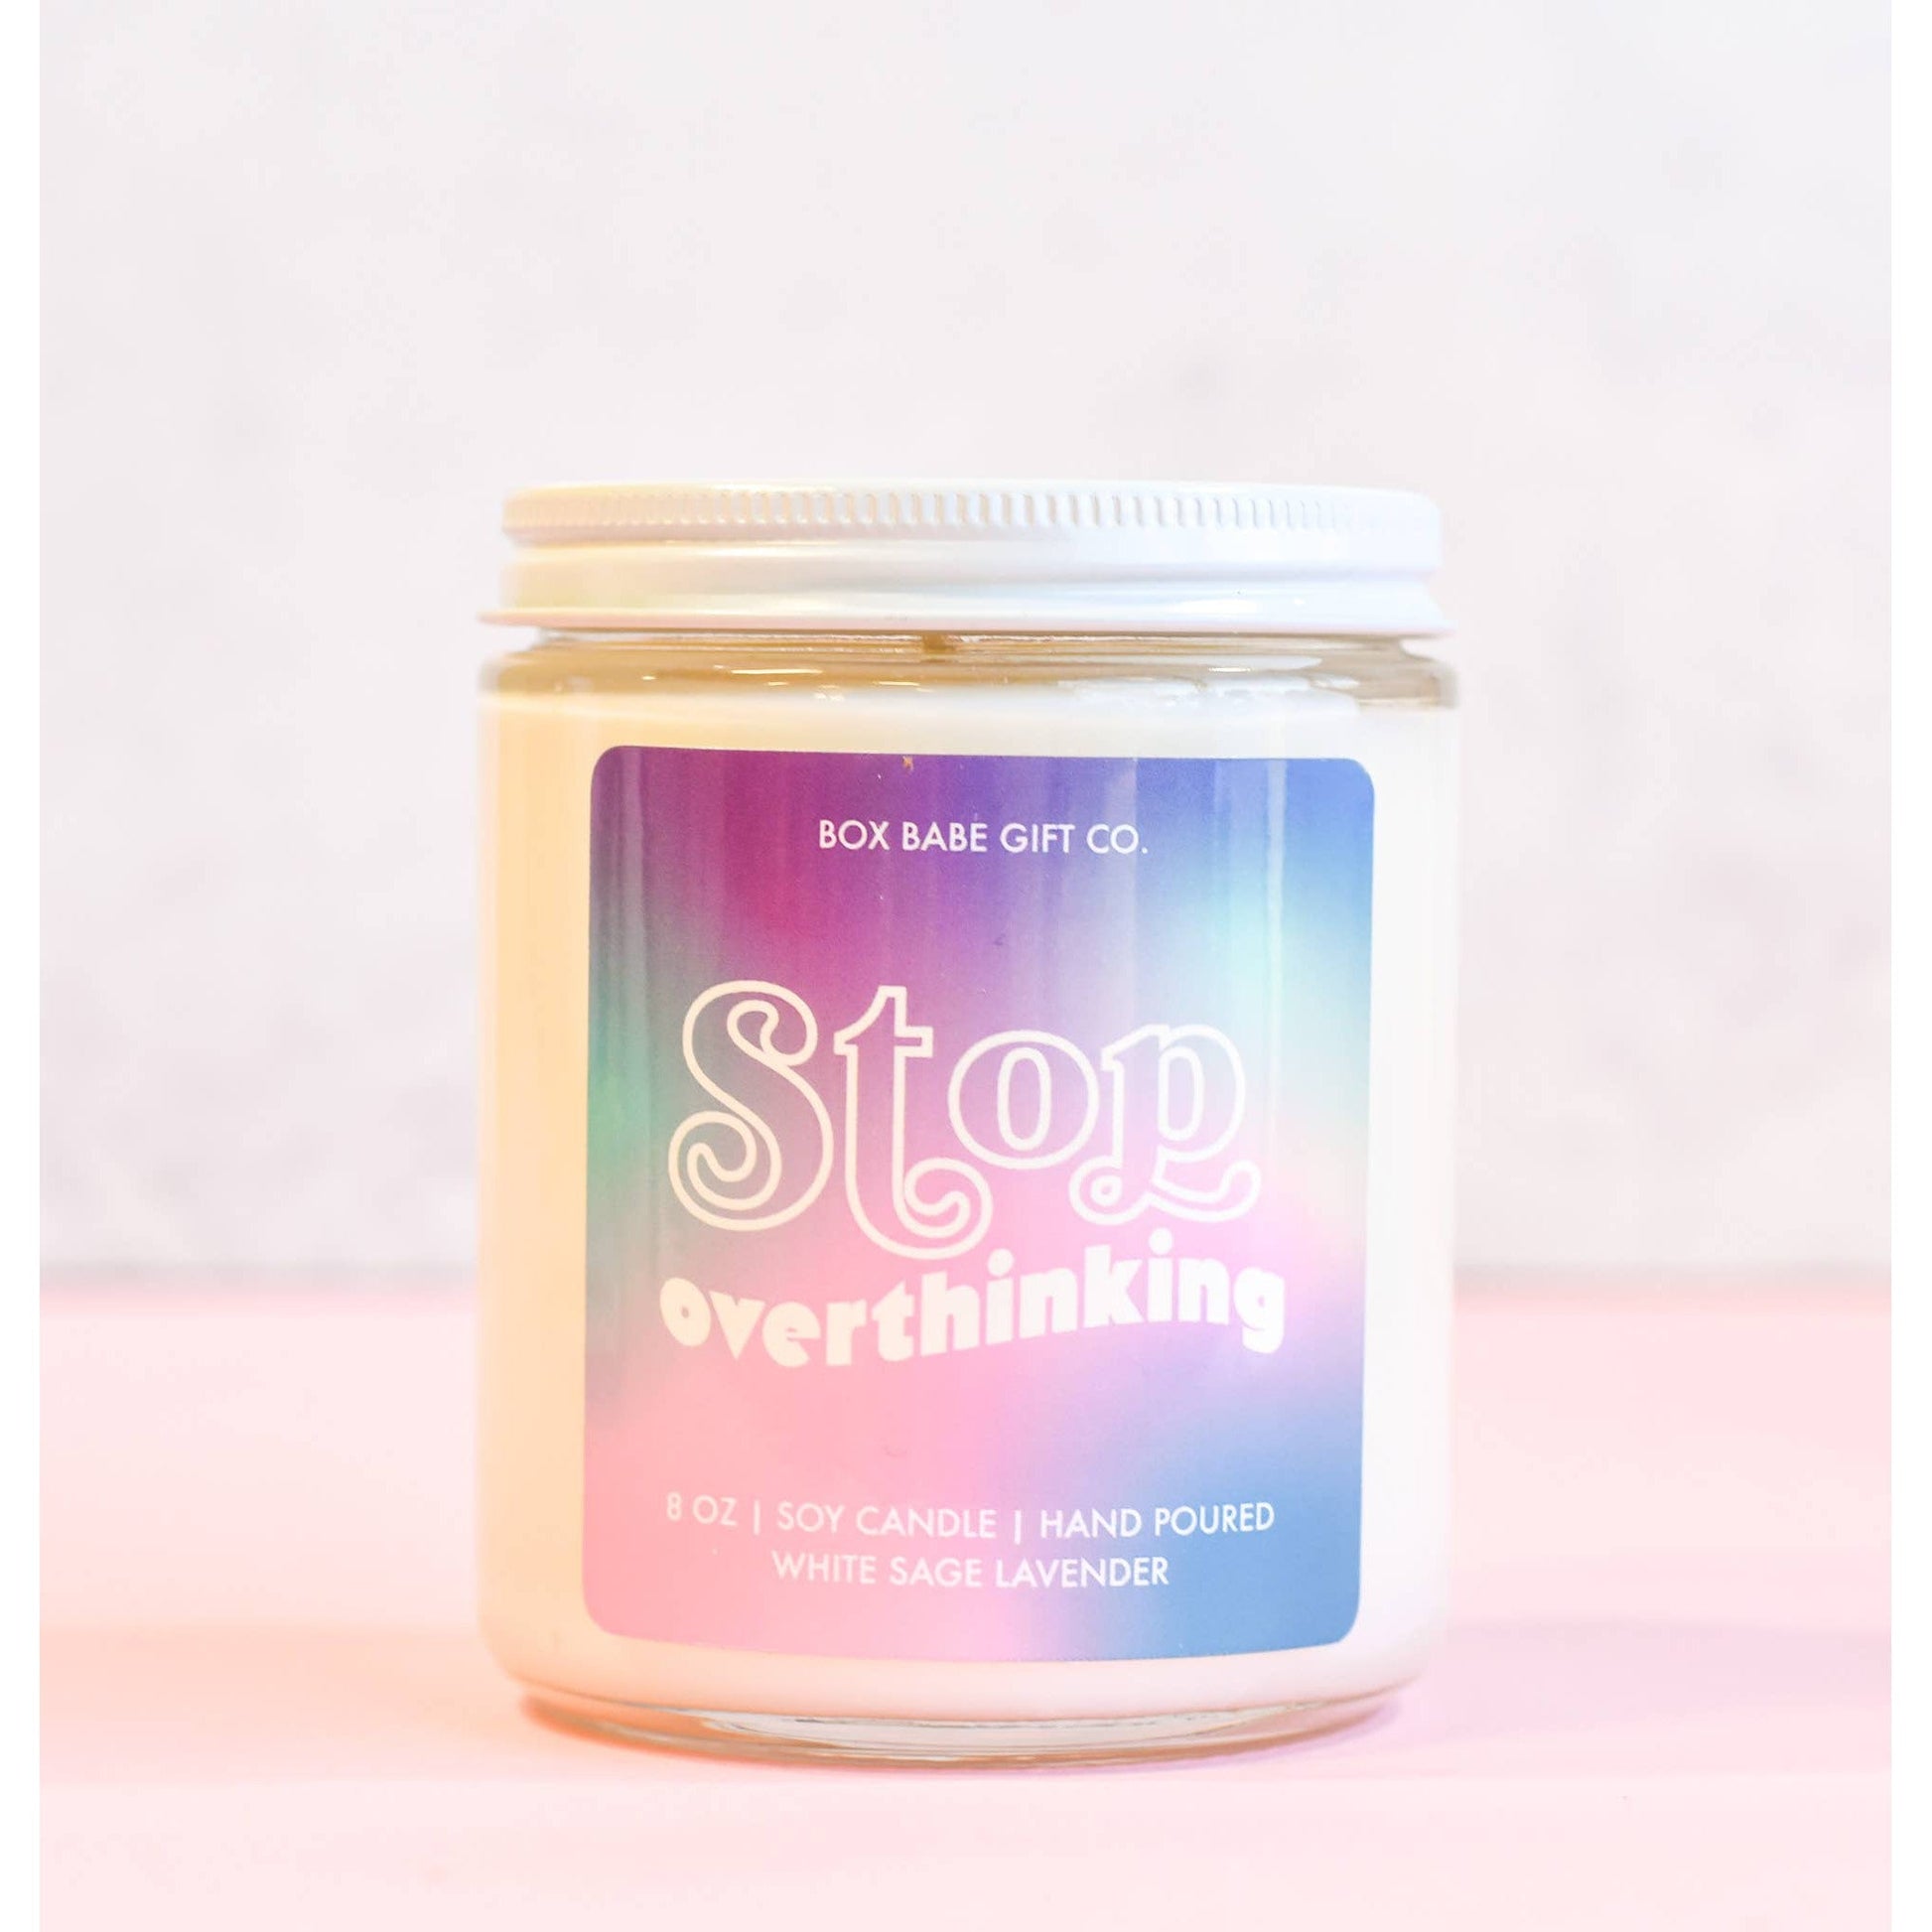 Stop Overthinking Candle in White Sage Lavender Scent | Self-Care Collection Wick Light